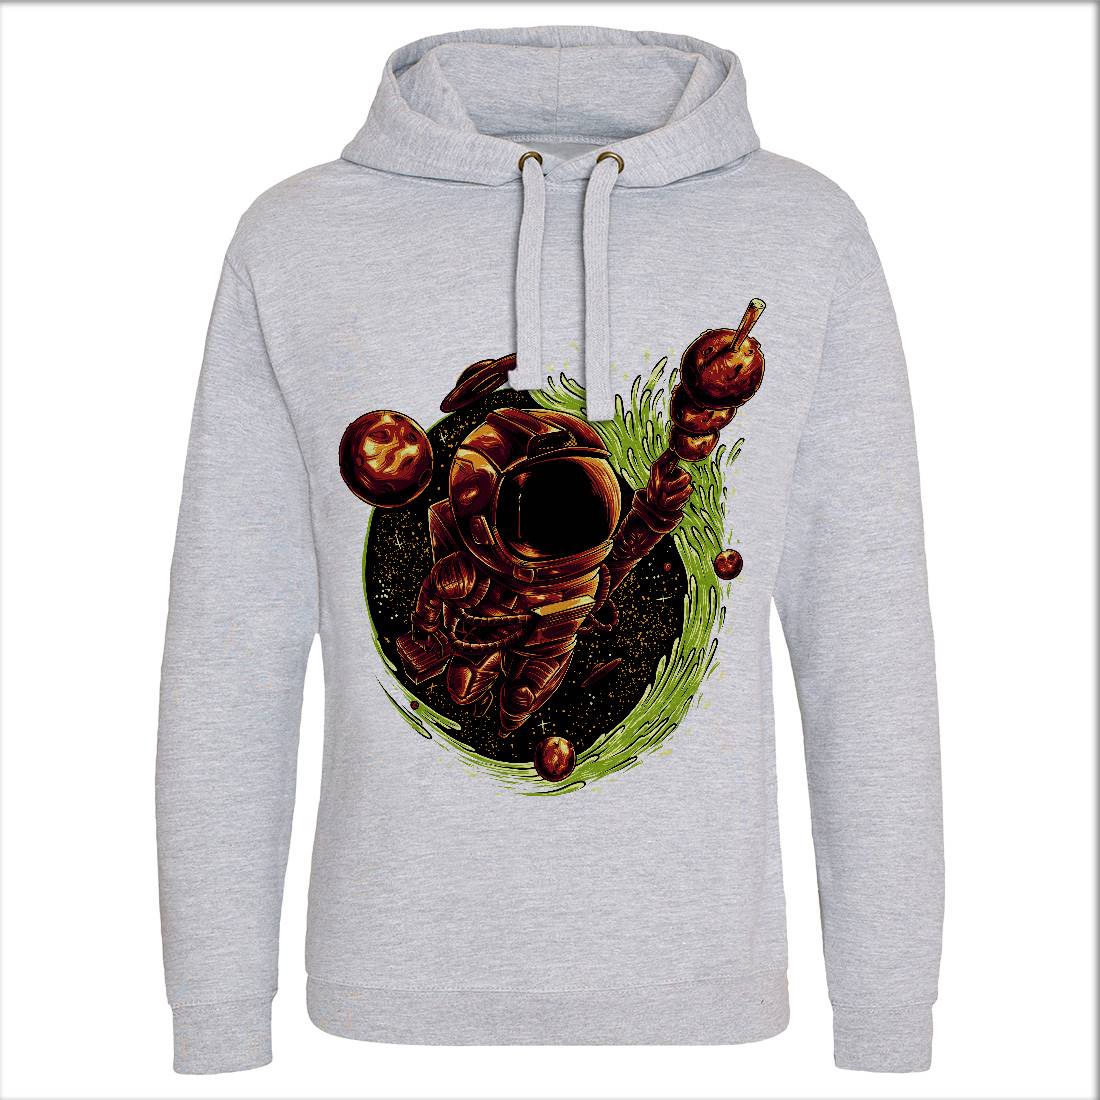 Grilled Meatball Mens Hoodie Without Pocket Space D037